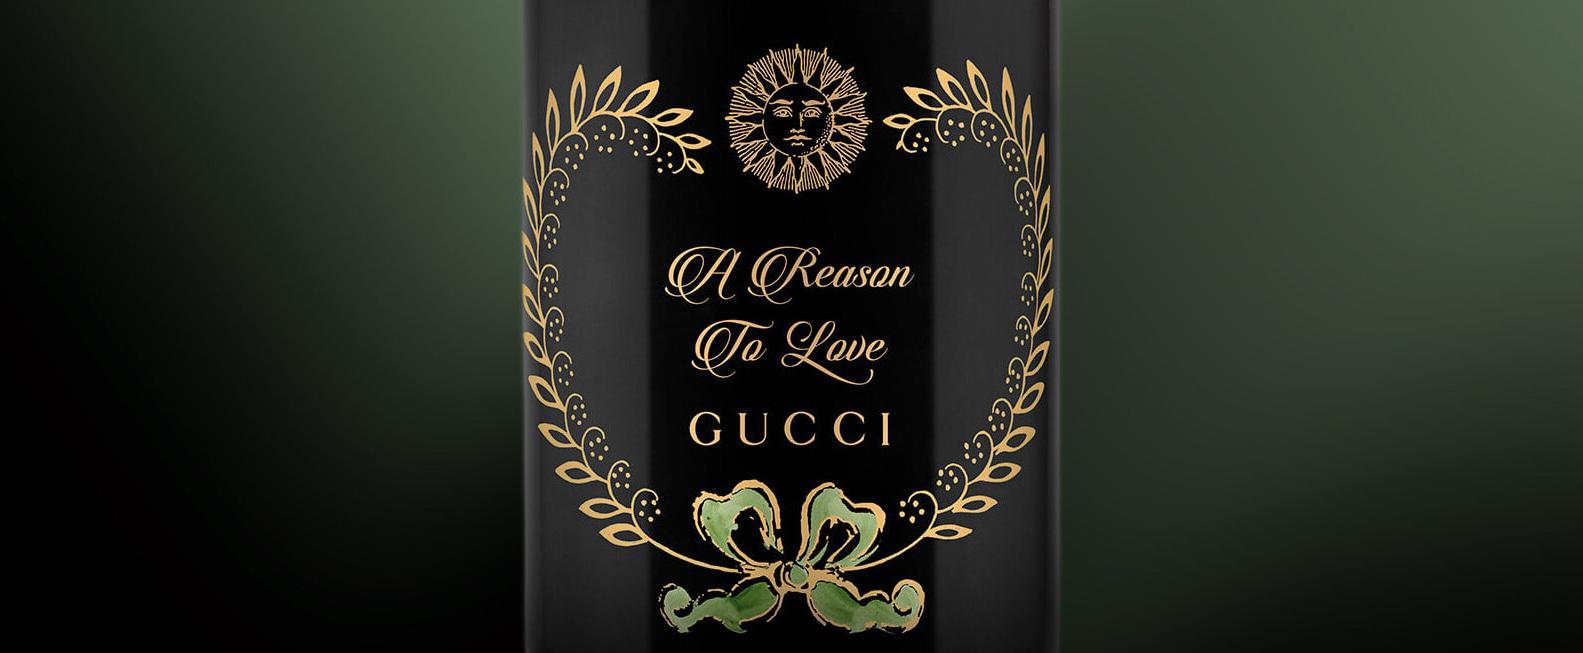 “A Reason to Love” - Gucci Expands “The Alchemist’s Garden” Fragrance Series